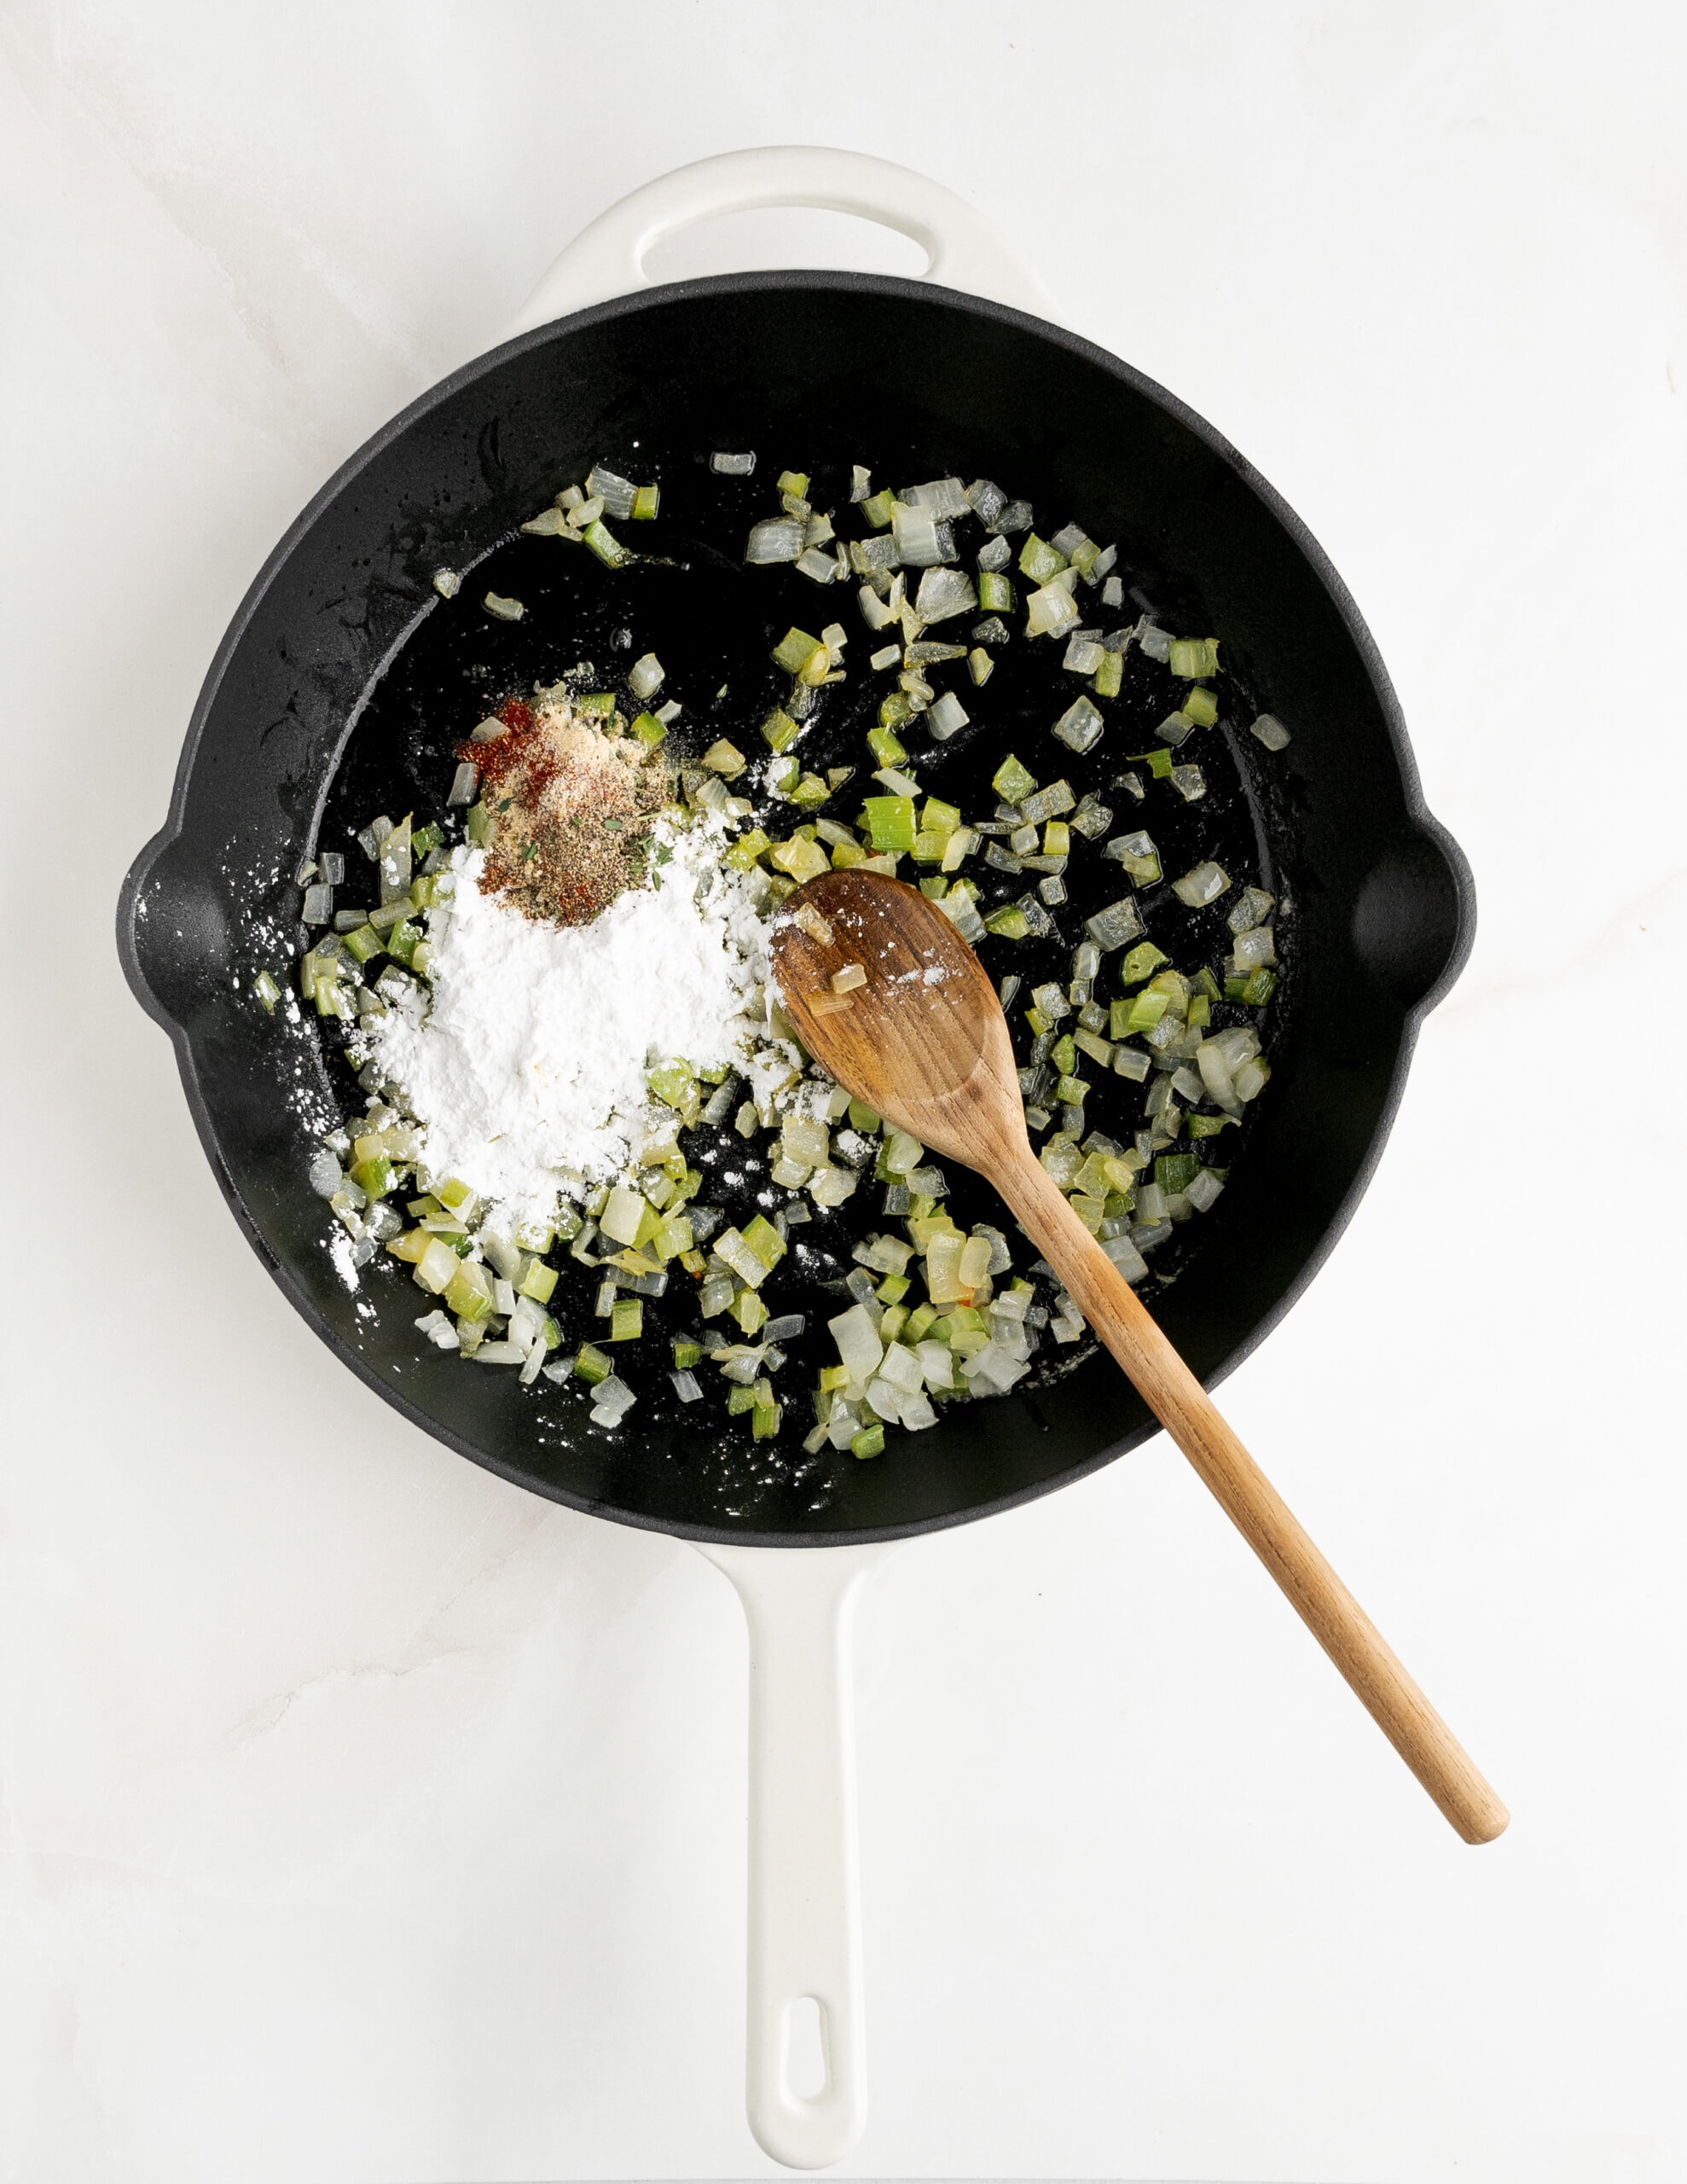 A large white skillet with onions, celery, tapioca starch, and seasonings, stirred with a wooden spoon.